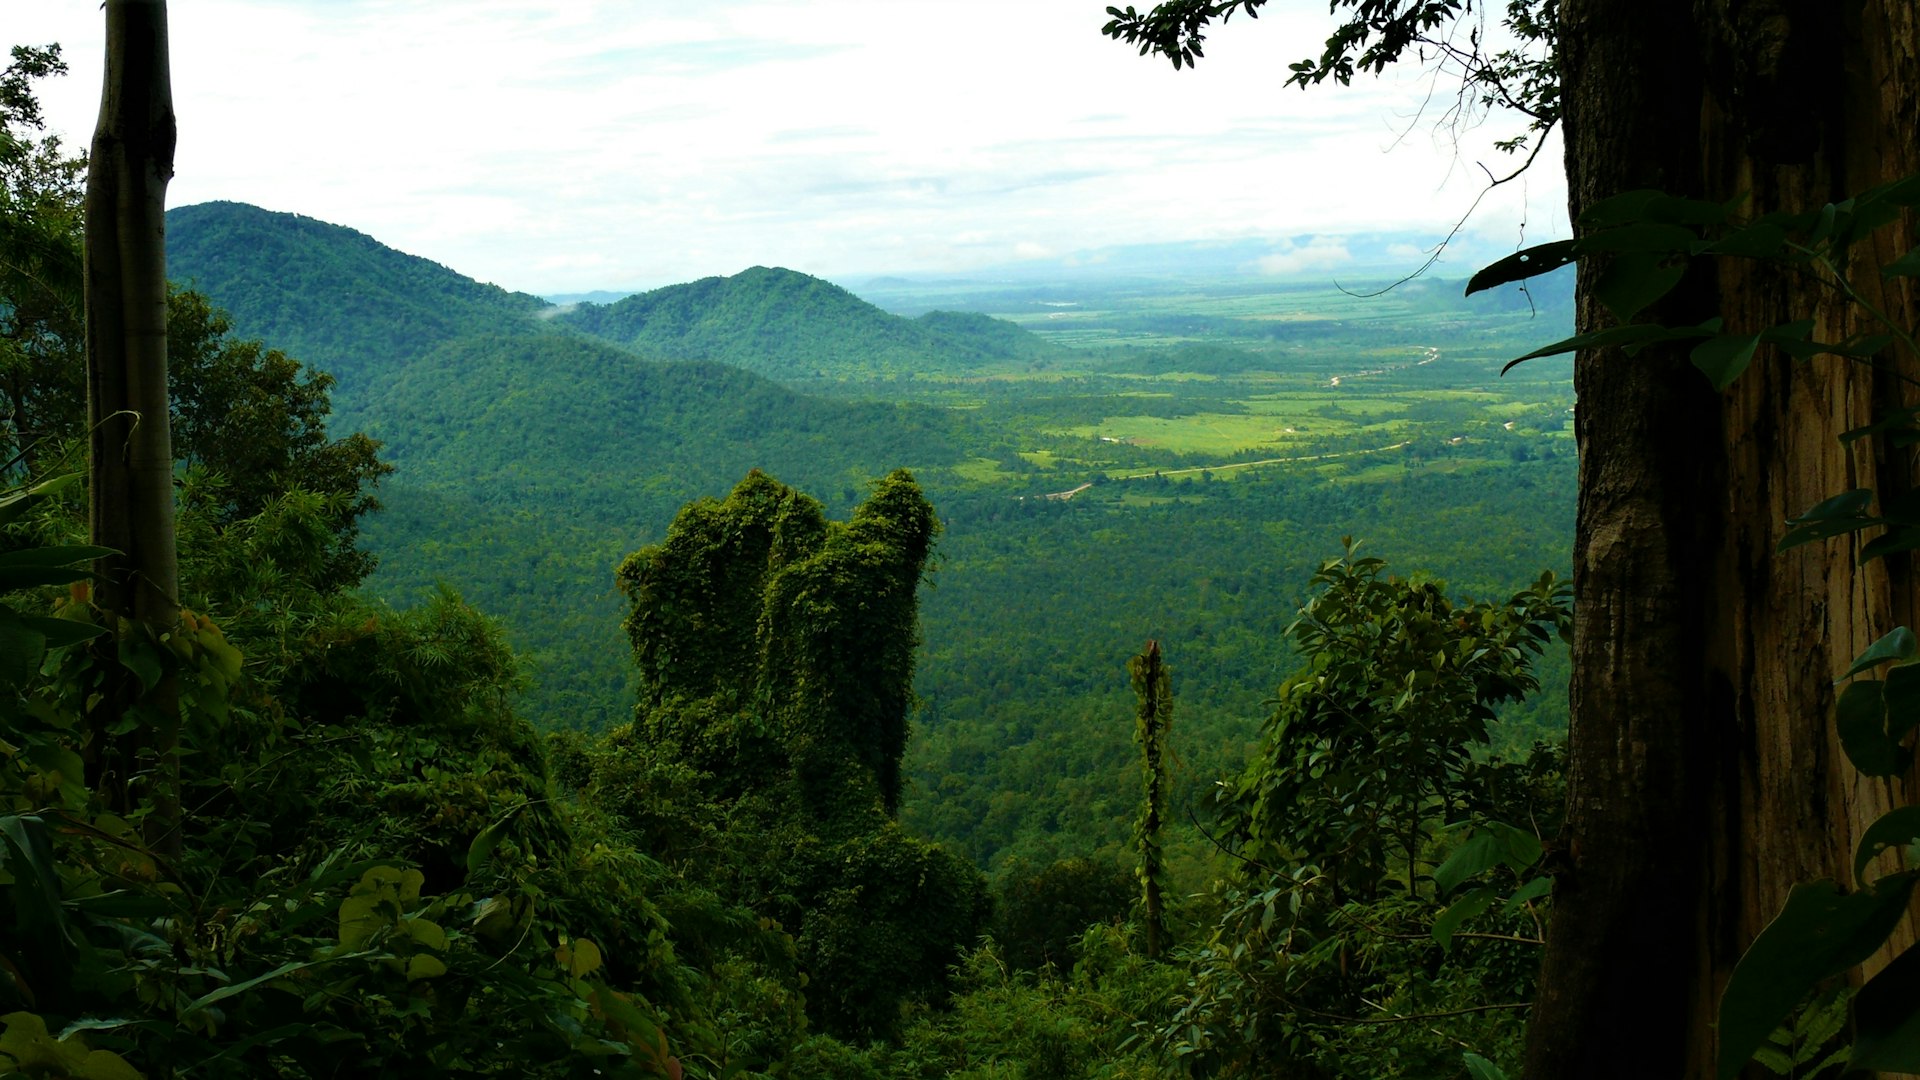 Panoramic view of the Cardamom Rainforest Landscape in the Cardamom Mountains, Cambodia